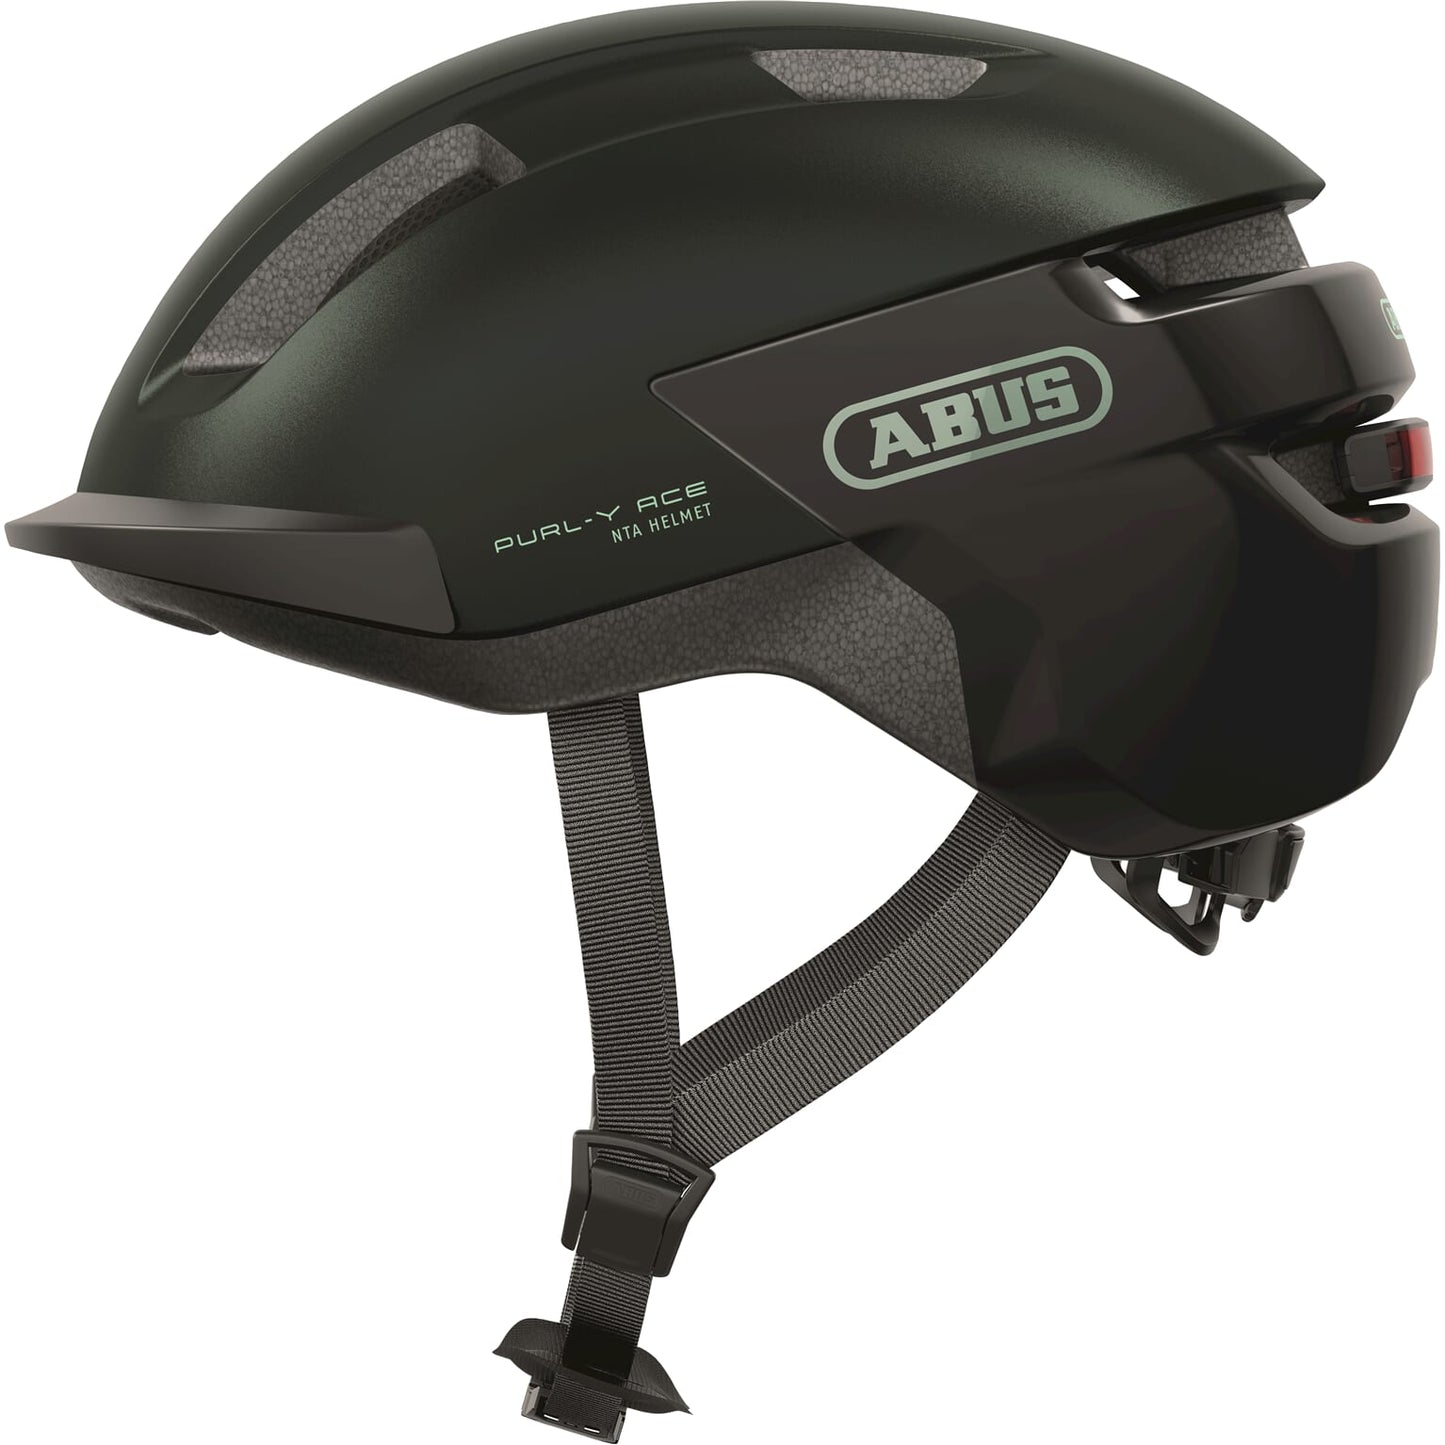 Abus Helm Purl-Y ACE moss green M 54-58cm